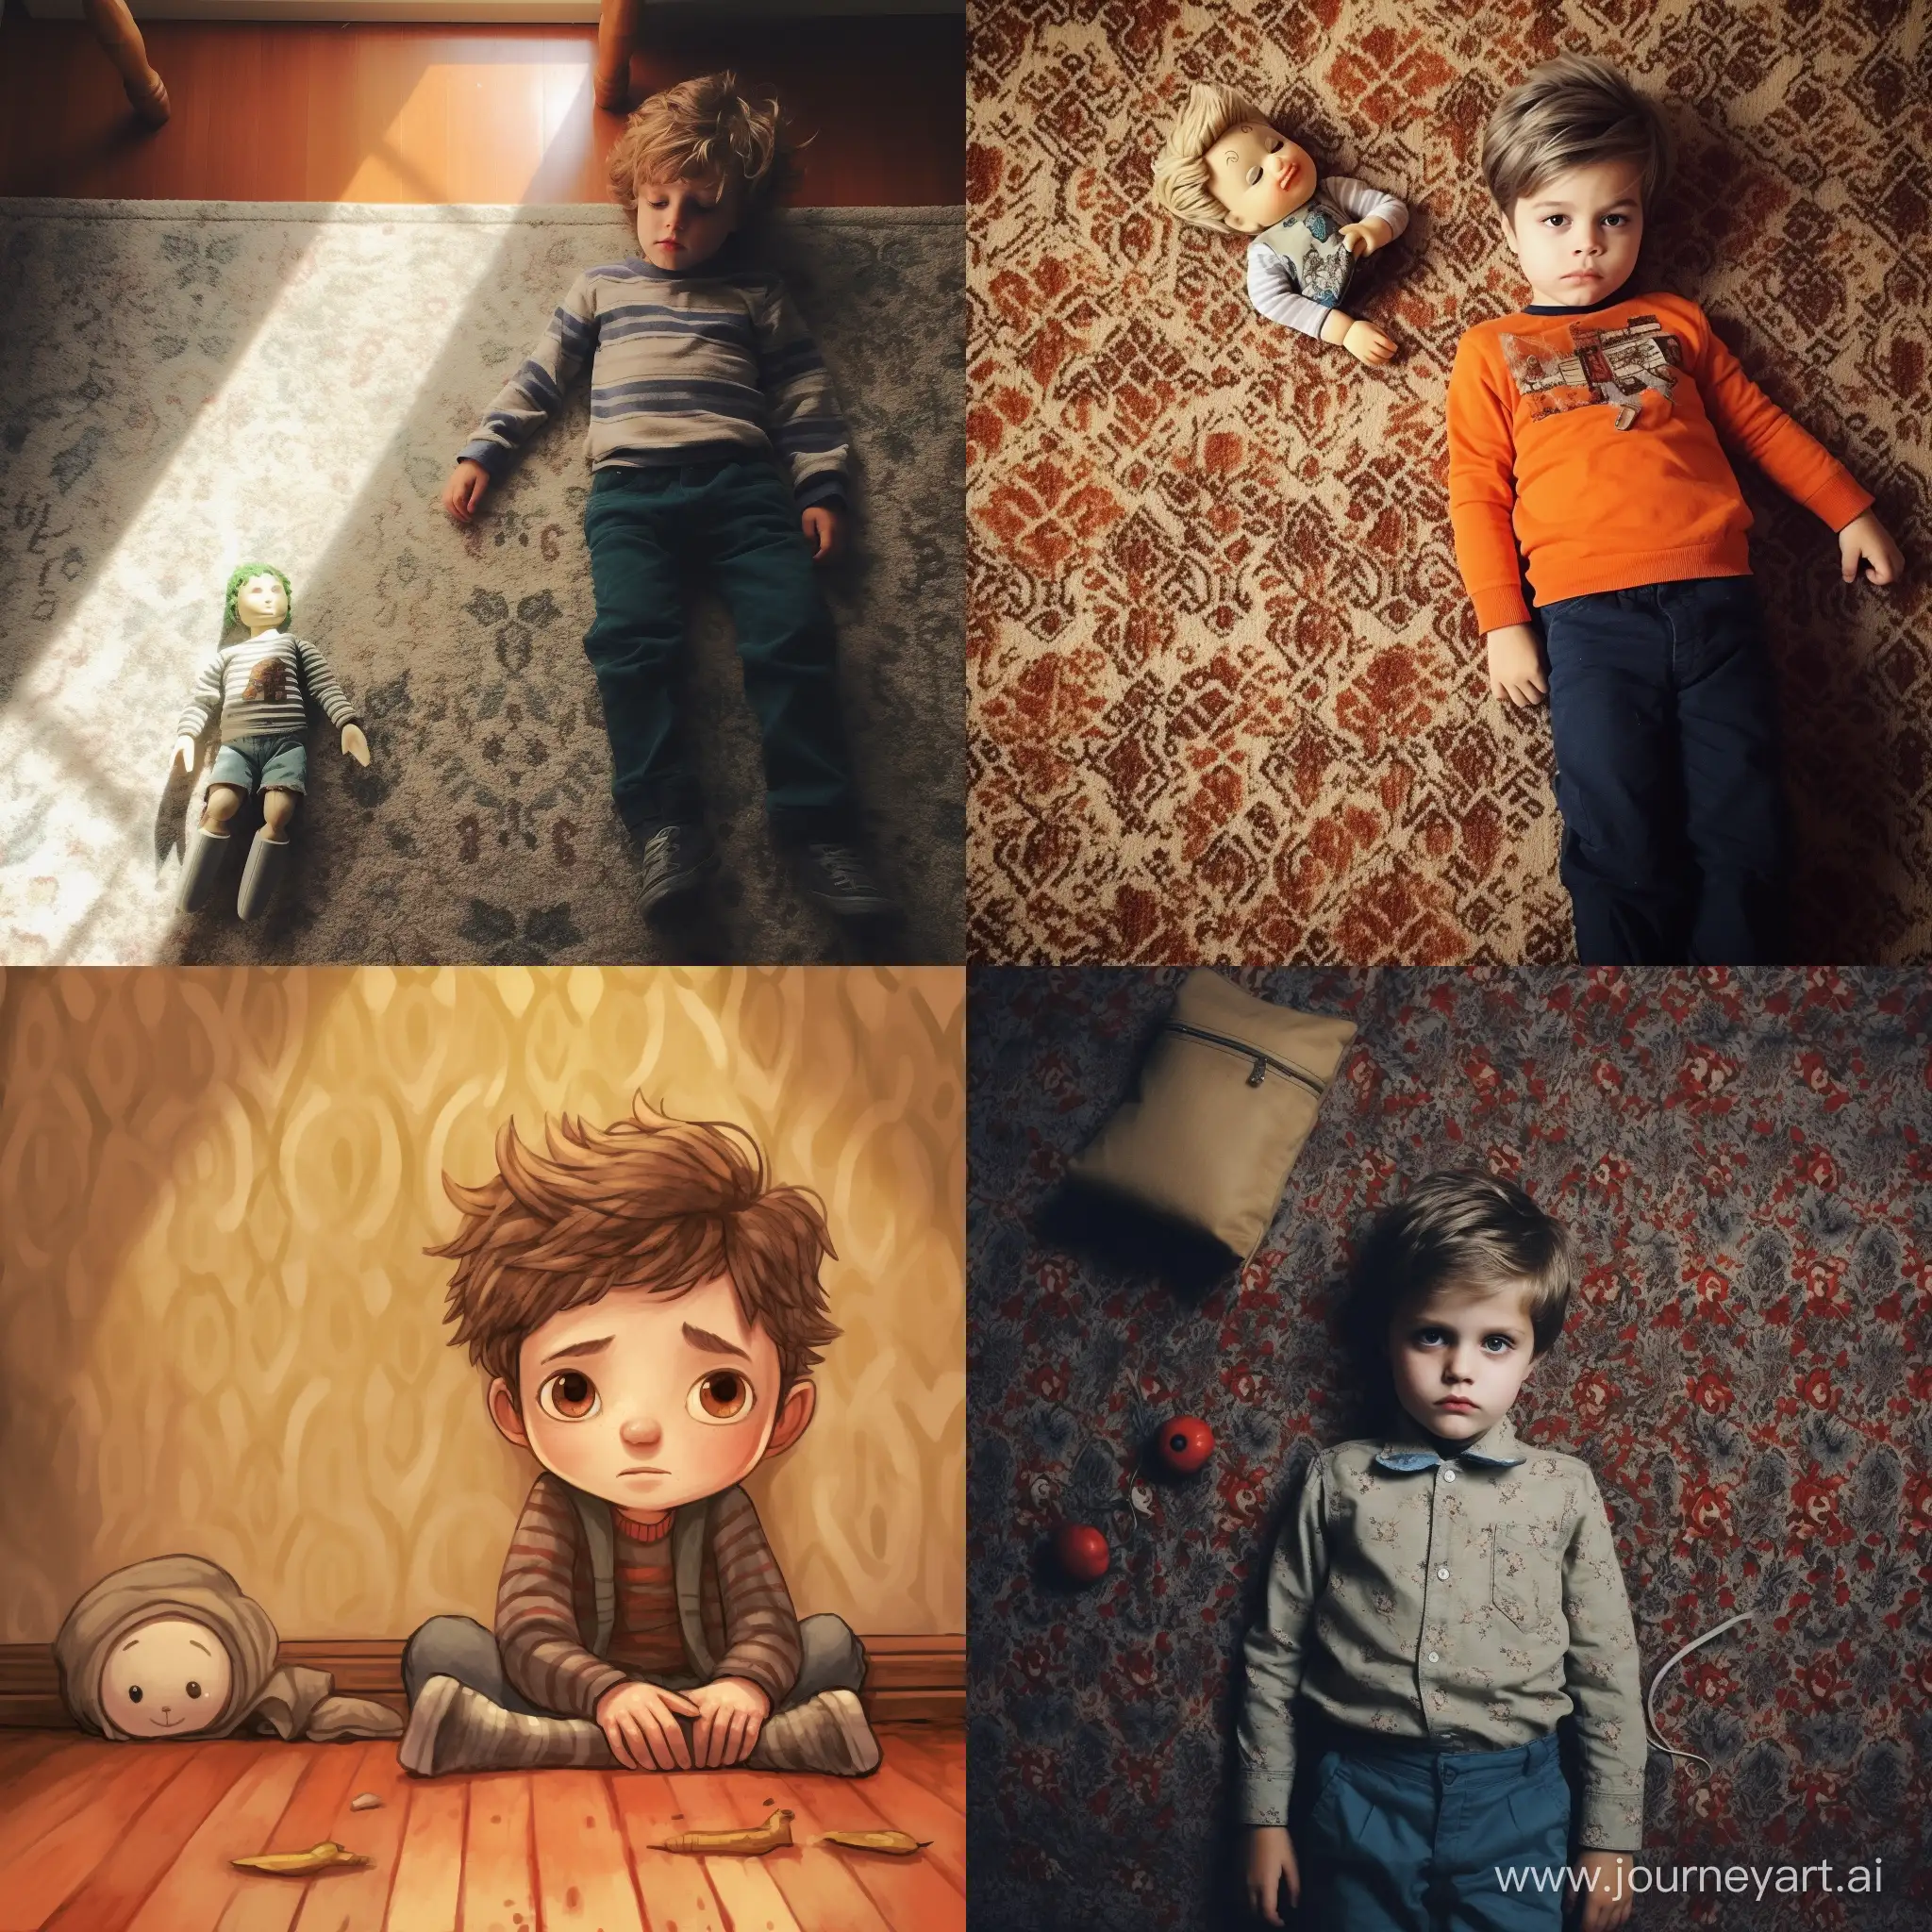 Lonely-Boy-Surrounded-by-Dolls-on-Comfortless-Carpet